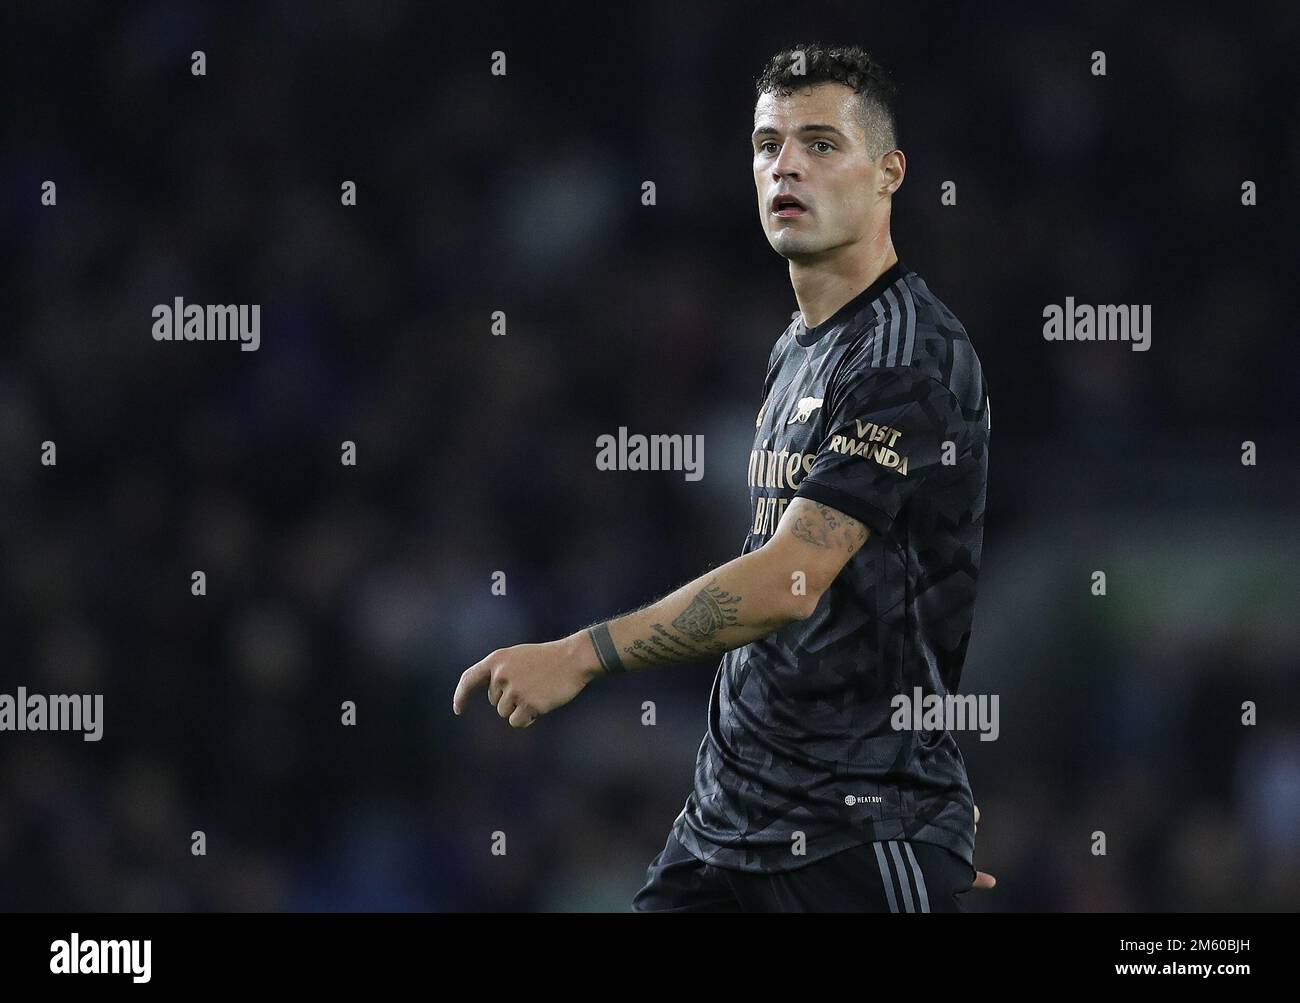 Brighton and Hove, UK. 31st Dec, 2022. Granit Xhaka of Arsenal during the Premier League match at the AMEX Stadium, Brighton and Hove. Picture credit should read: Paul Terry/Sportimage Credit: Sportimage/Alamy Live News Stock Photo